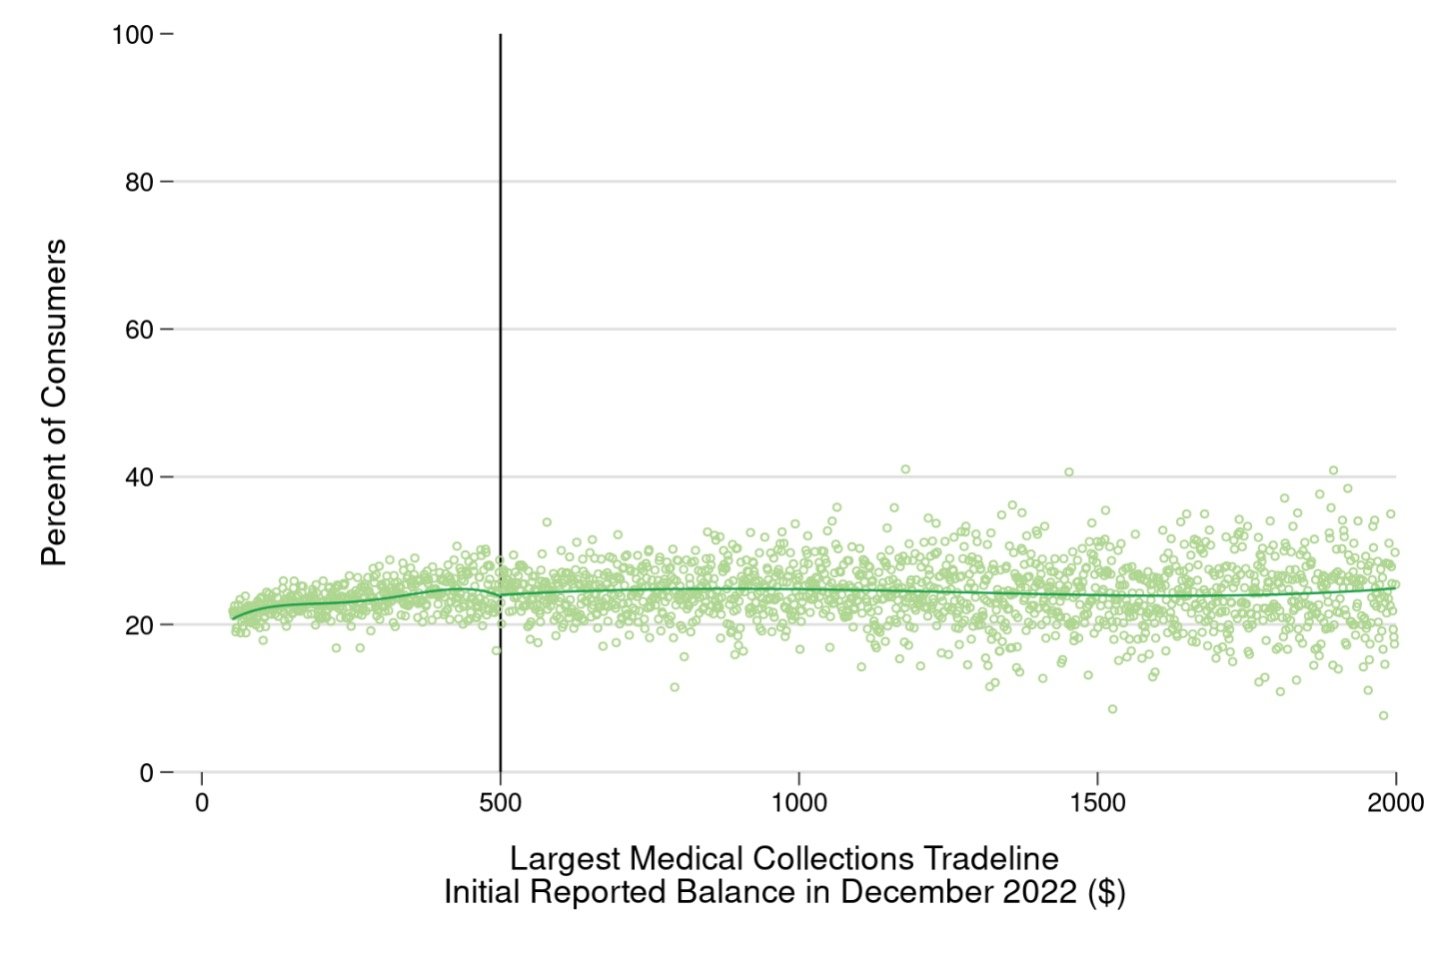 A scatterplot showing the share of consumers who made at least one hardy inquiry between April 2023 and August 2023 on the vertical axis, with a dot for each dollar value of the highest medical collections tradeline balance in December 2022. The plot shows a continuous, tight cloud of points above and below $500.